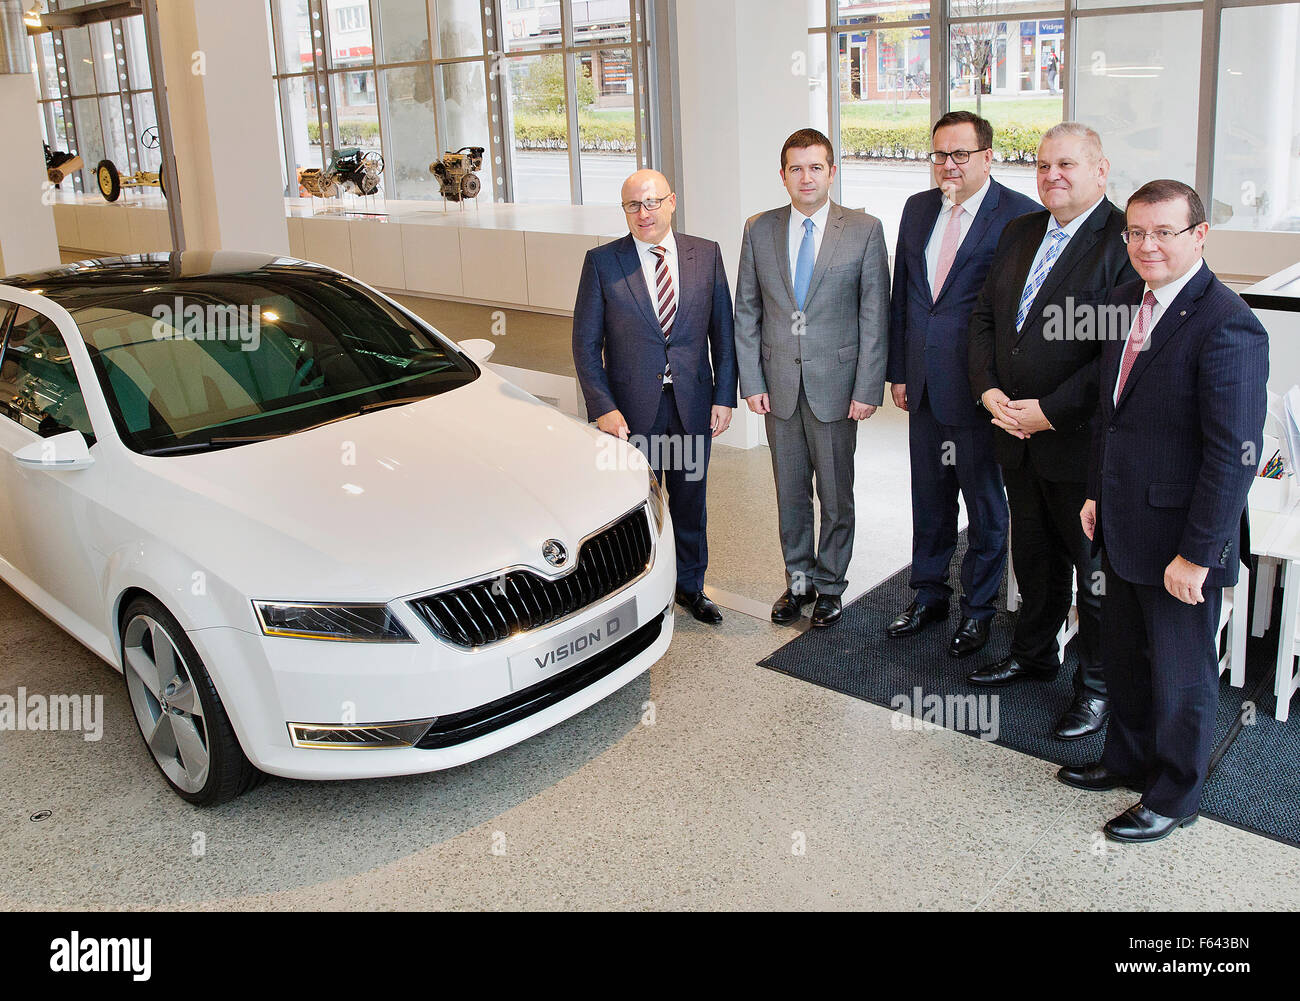 From left: Skoda Auto Board Chairman Bernhard Maier, President of the Chamber of Deputies of Czech Republic Jan Hamacek, Minister for Trade and Industry Jan Mladek, Governor of the Central Bohemia Region Milos Petera and Member of the Board of Management for Human Resources Management Bohdan Wojnar pose during their visit of Skoda Museum in Mlada Boleslav, Czech Republic, November 11, 2015. (CTK Photo/Rene Fluger) Stock Photo